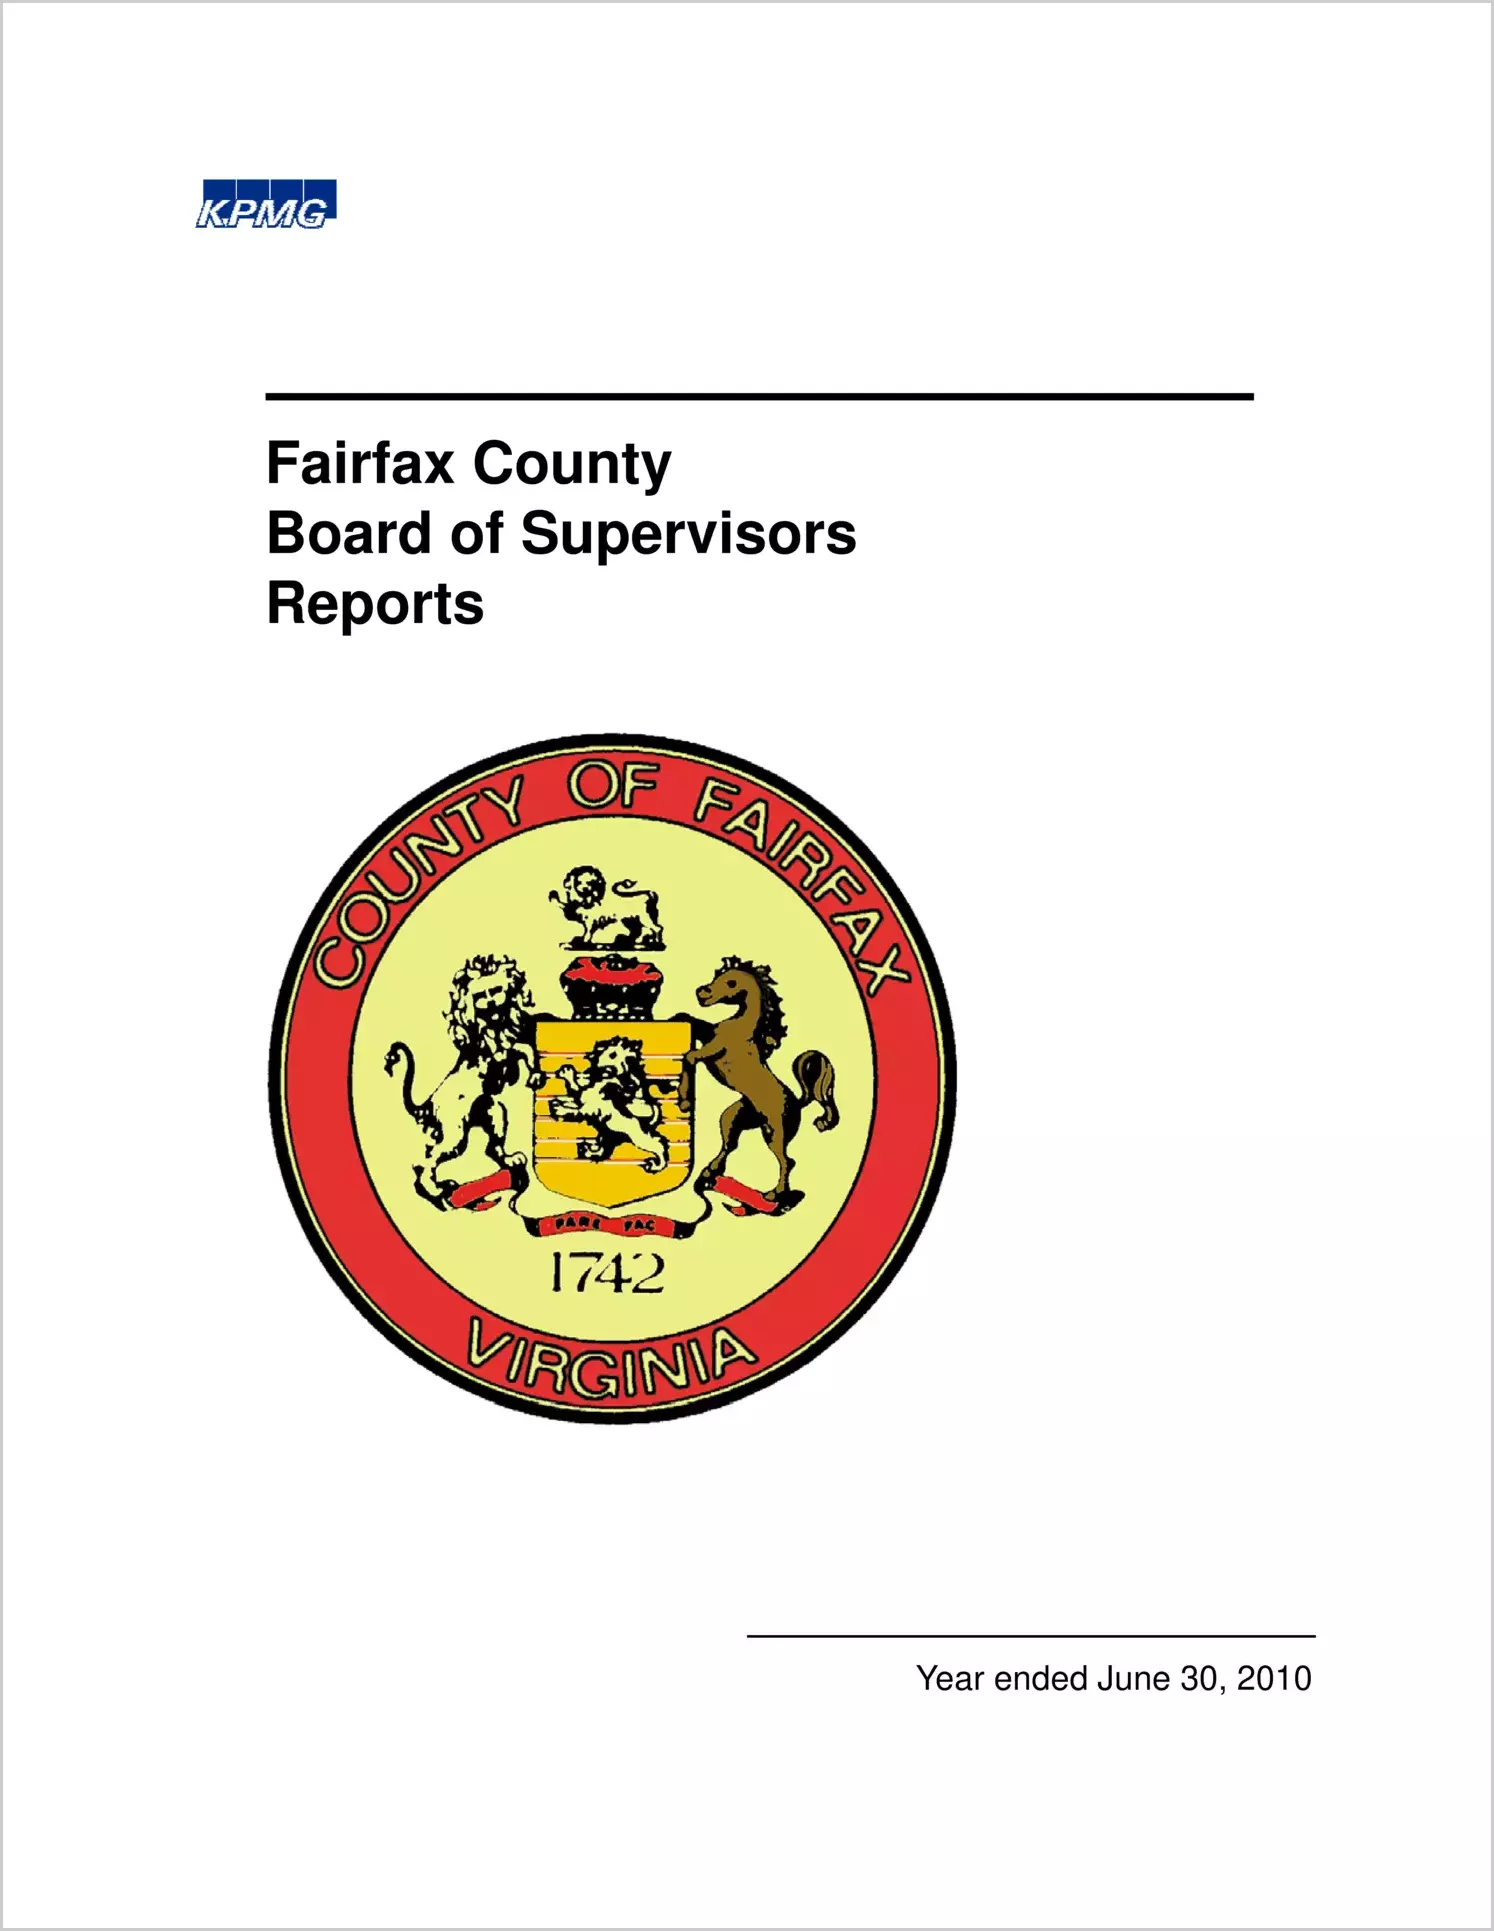 2010 Internal Control and Compliance Report for County of Fairfax